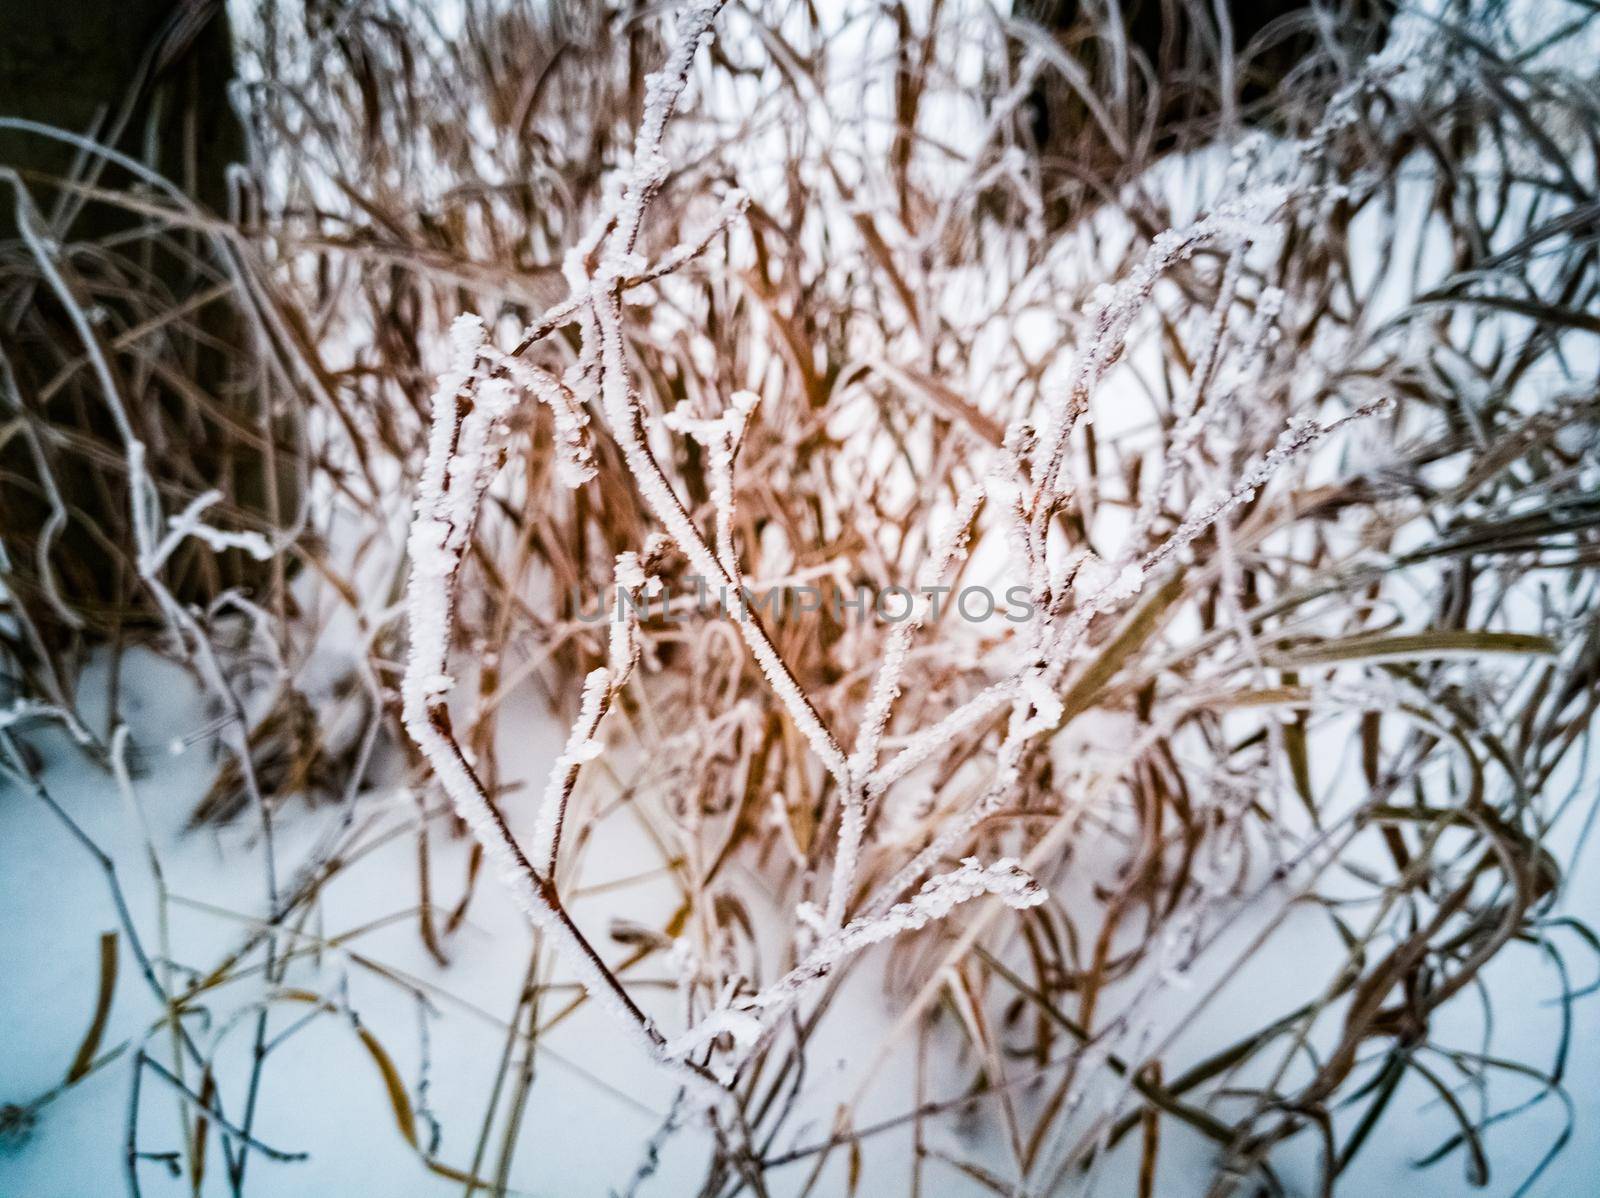 dry yellow grass under the snow. winter time. soft focus